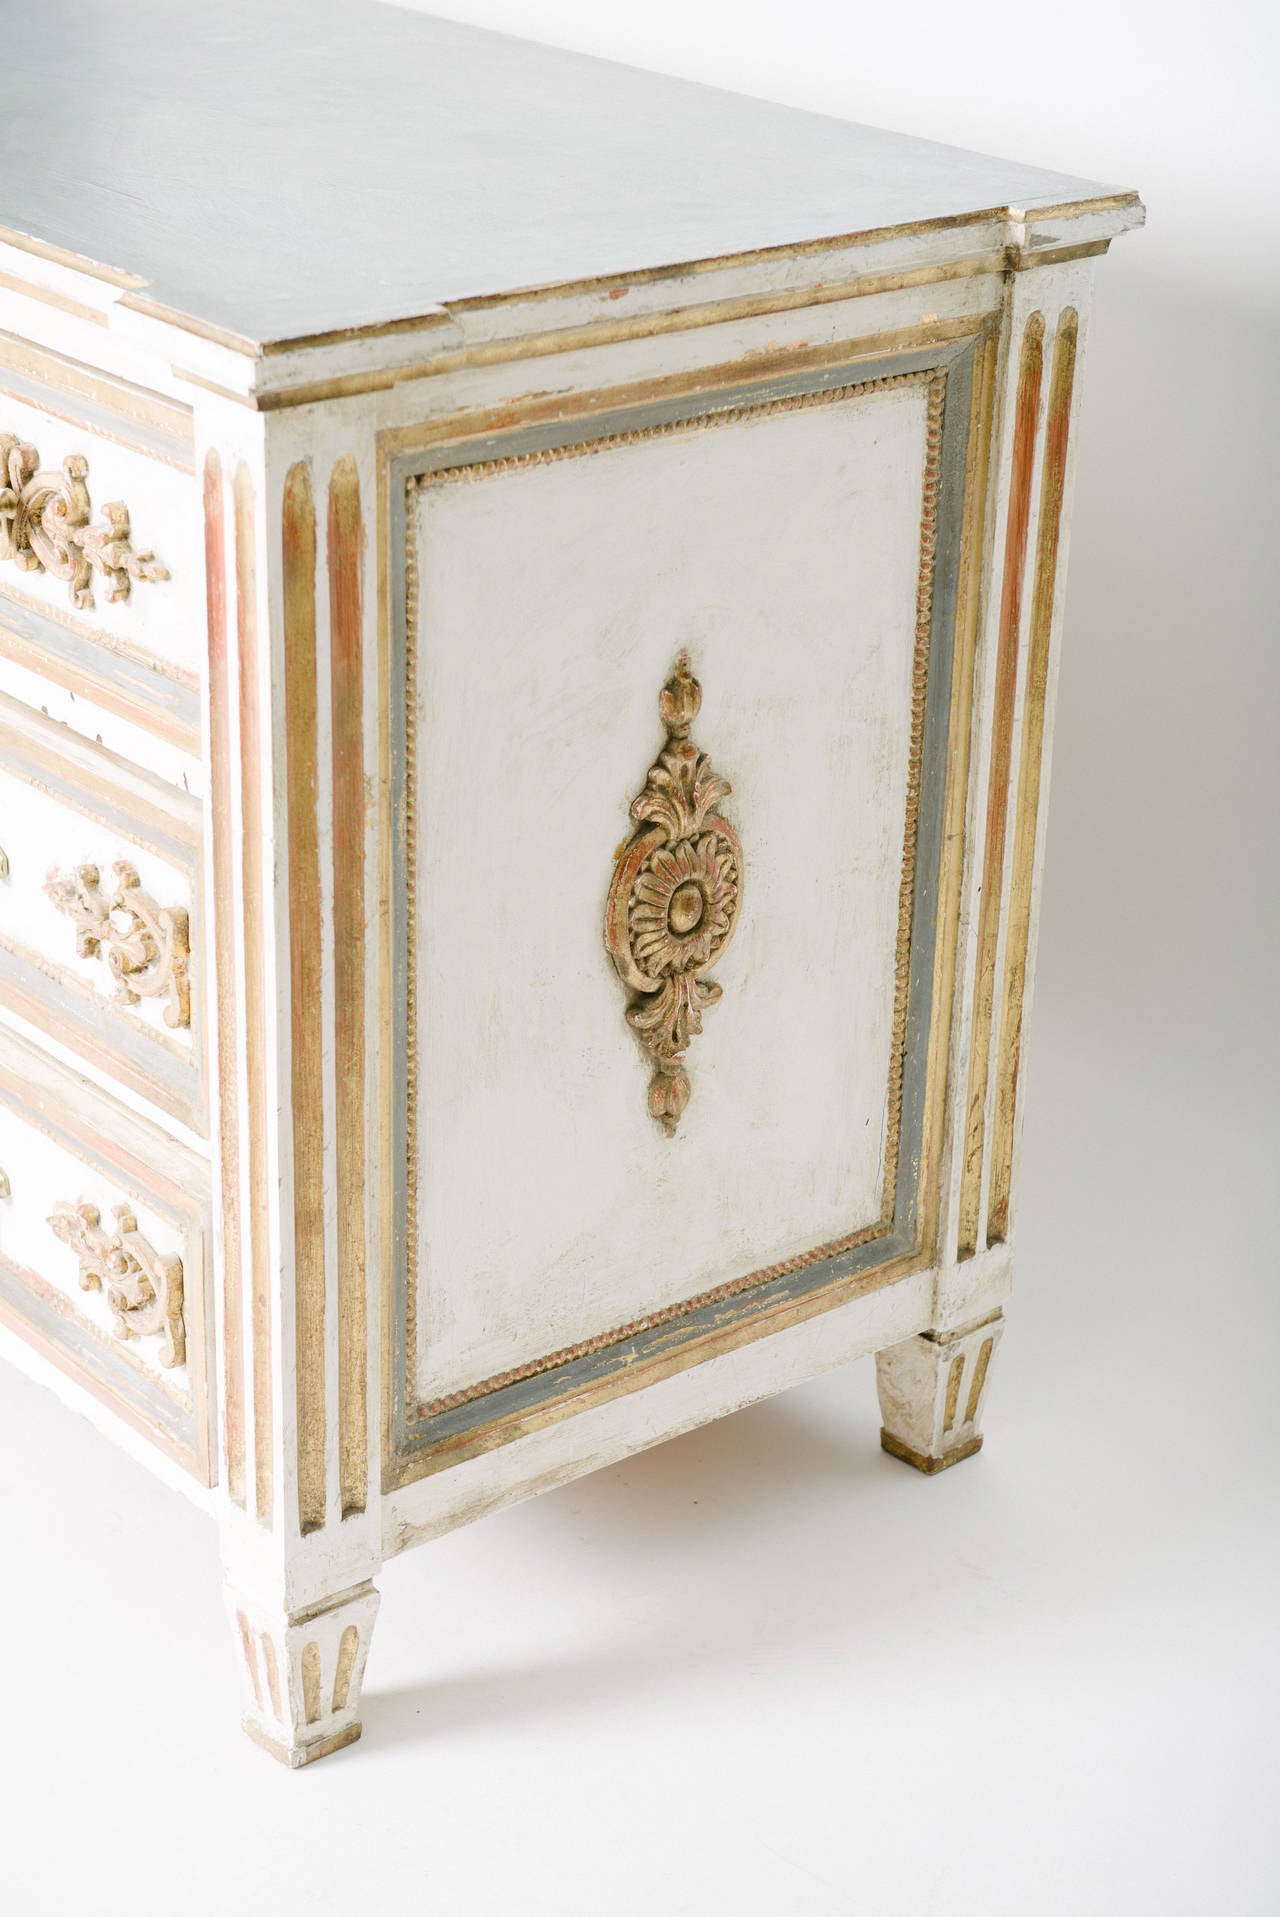 Italian Late 18th-Early 19th Century Painted and Parcel-Gilt Louis XVI Style Commode